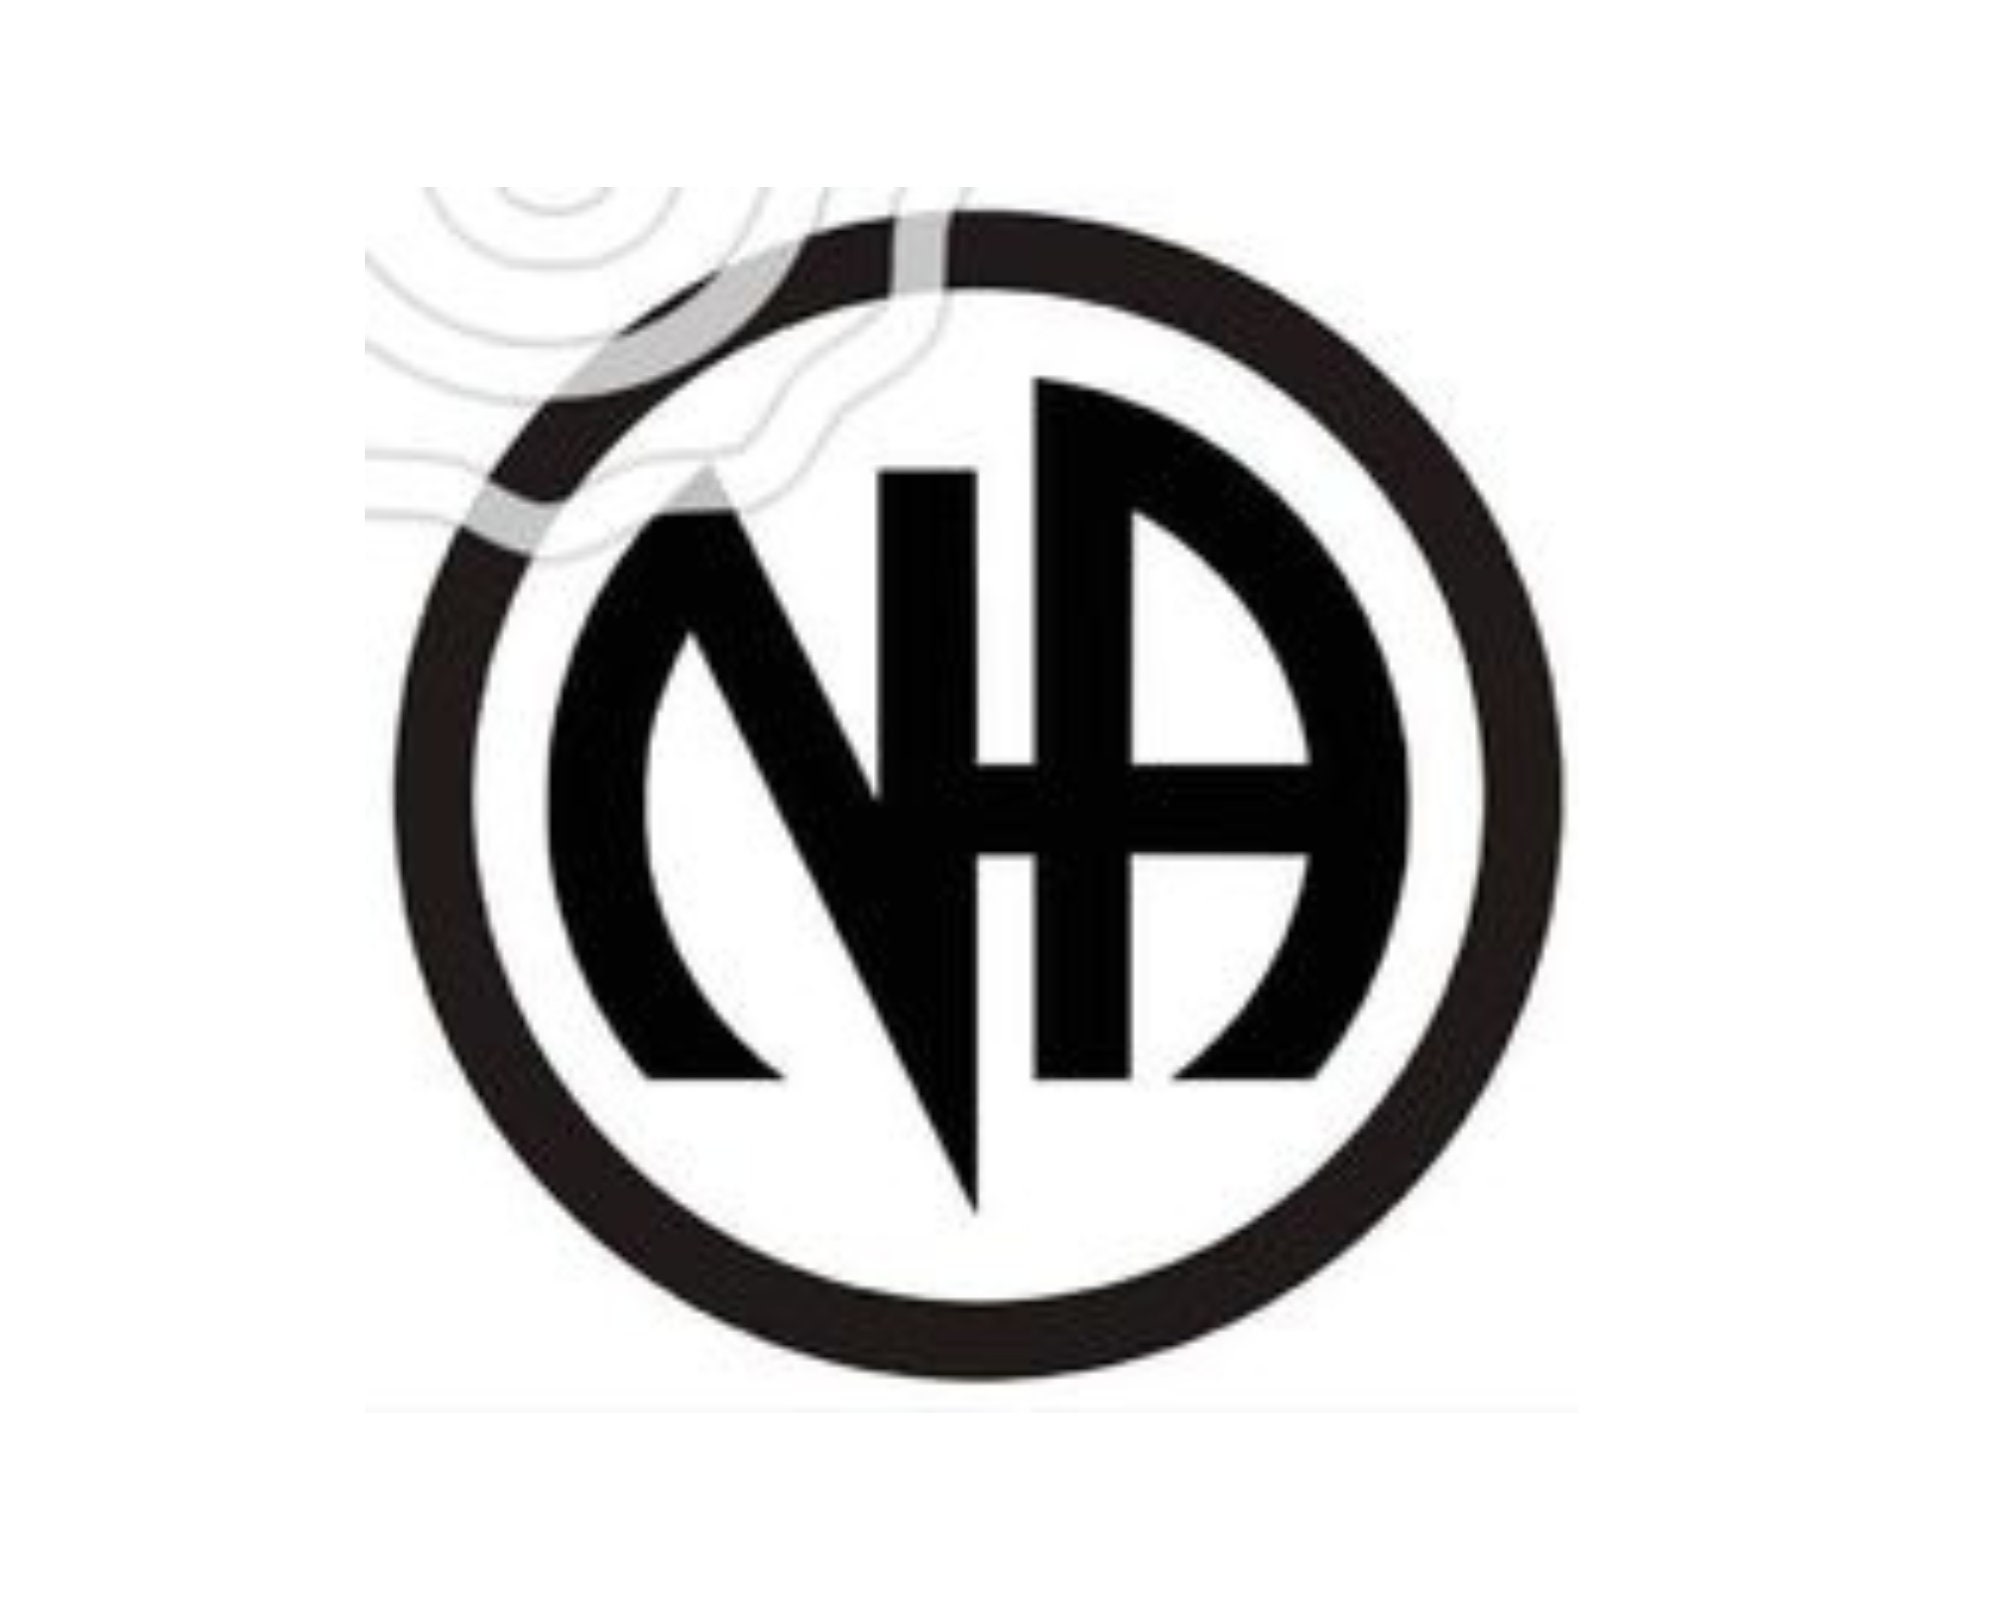 NA Svg Png Images Pictures Narcotics Anonymous Etsy